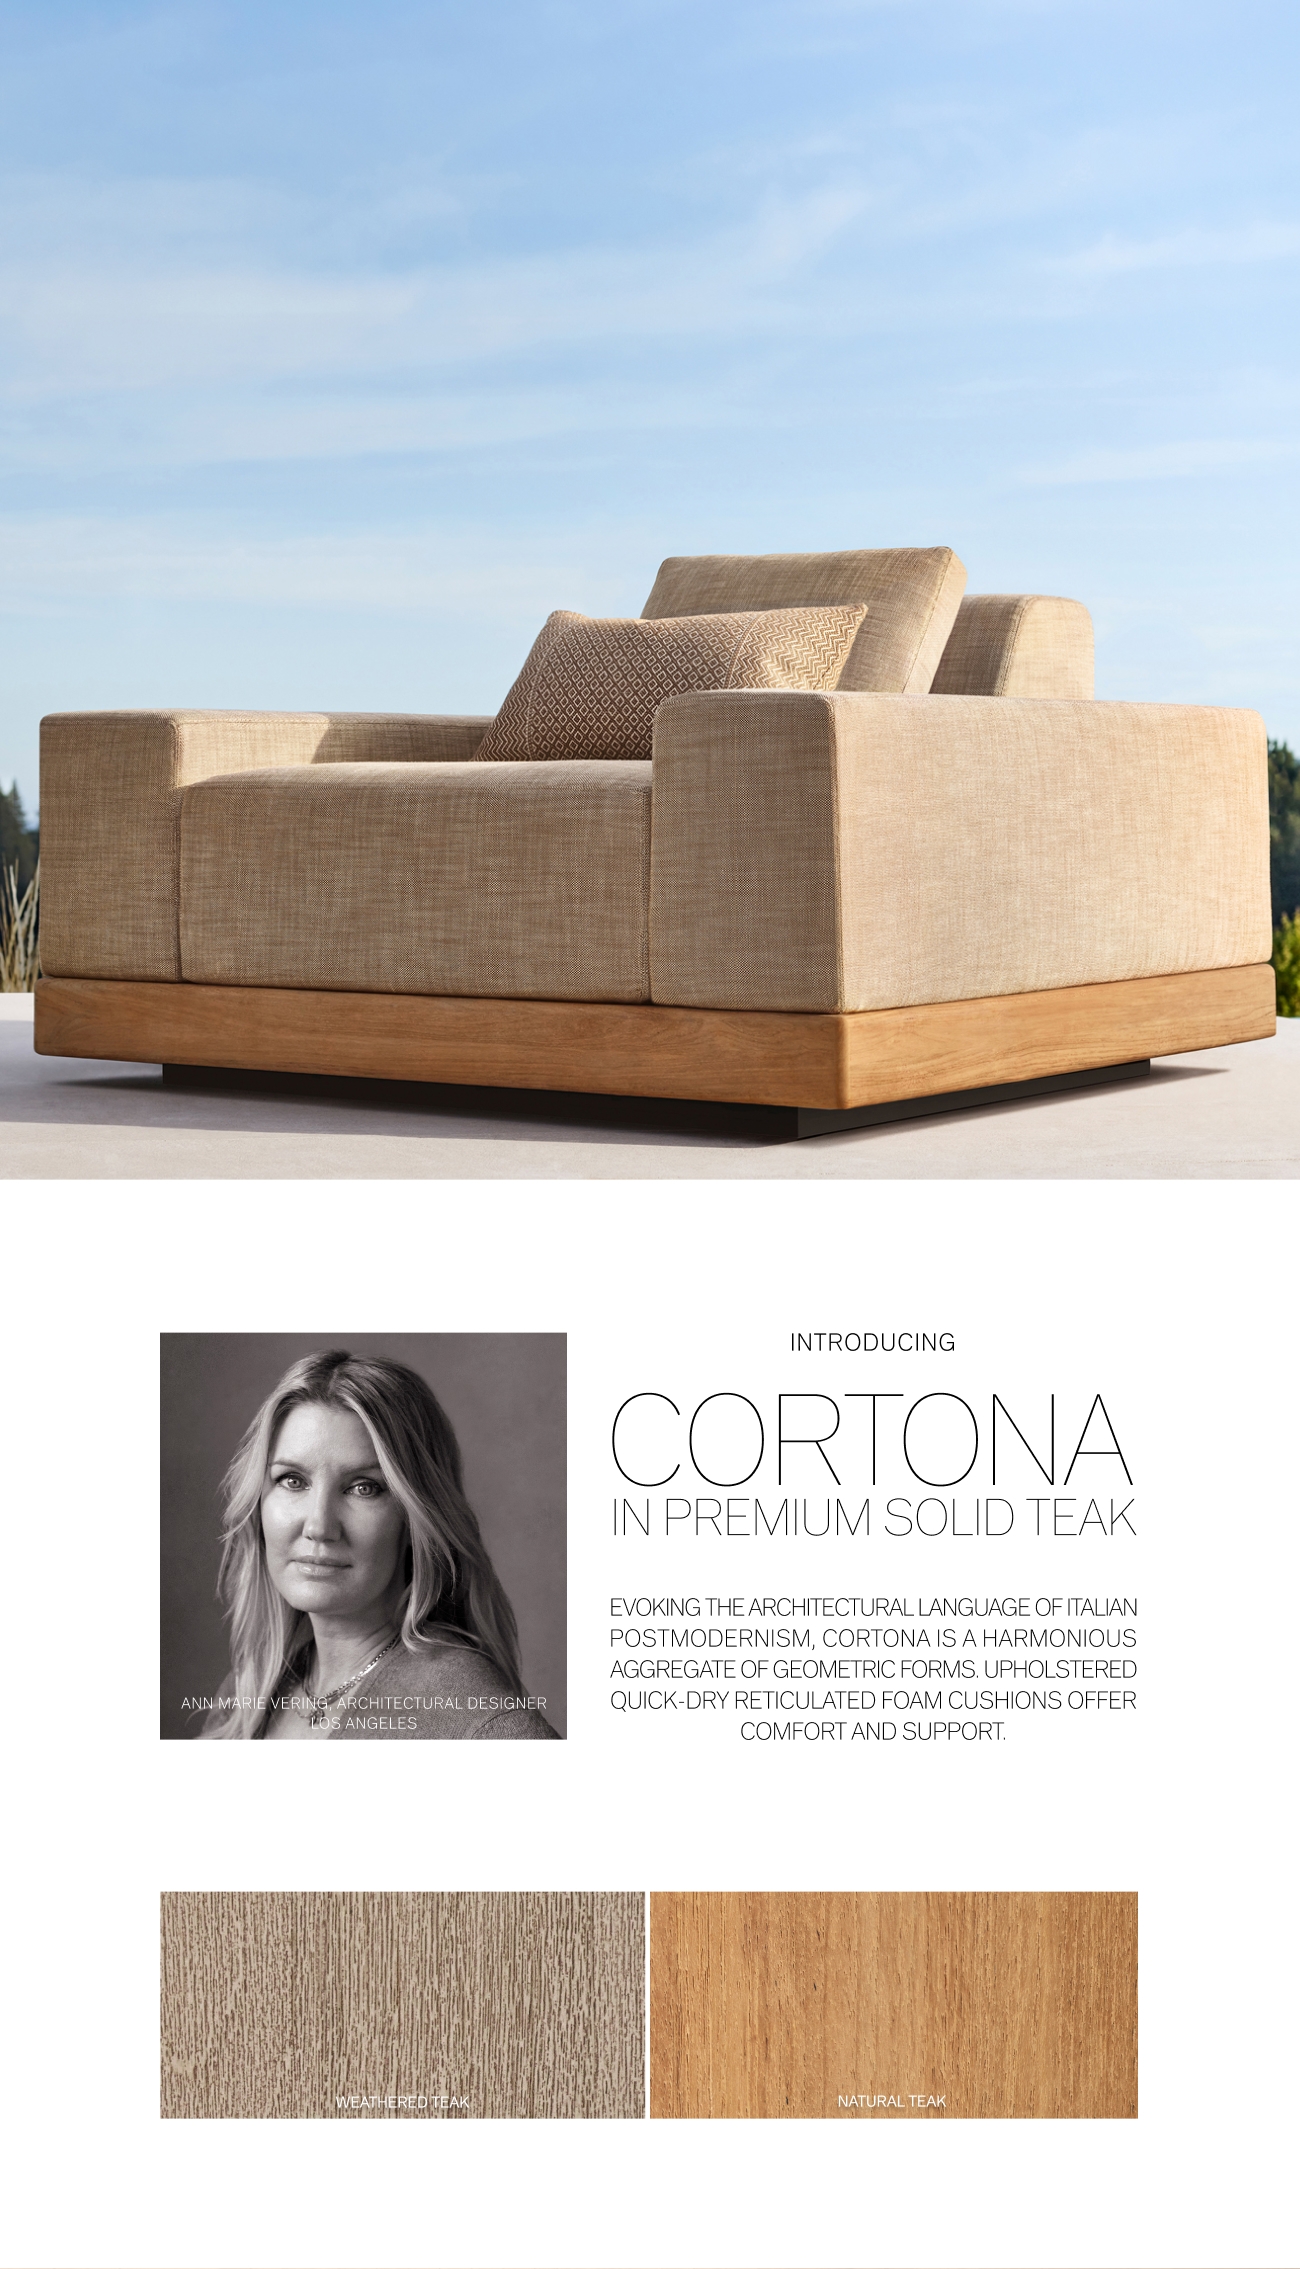 URAL DESIGNER, NTRODUCING CORTONA IN PREMIUM SOLID TEAK EVOKING THE ARCHITECTURAL LANGUAGE OF ITALIAN POSTMODERNISM, CORTONA IS AHARMONIOUS AGGREGATE OF GEOMETRIC FORMS. UPHOLSTERED QUICK-DRY RETICULATED FOAM CUSHIONS OFFER COMFORT AND SUPPORT. 